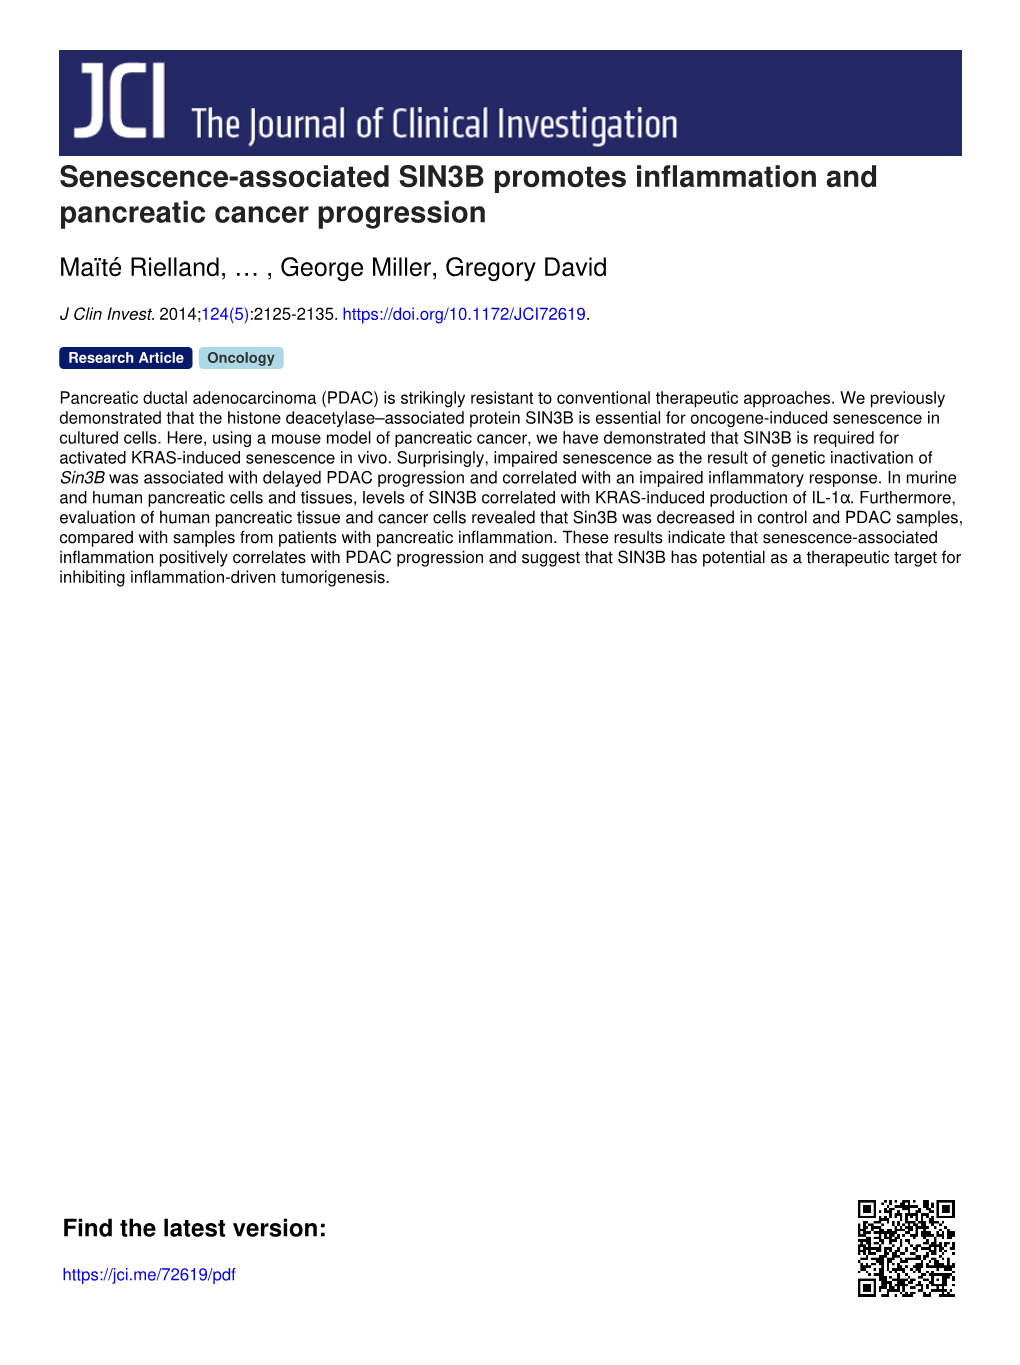 Senescence-Associated SIN3B Promotes Inflammation and Pancreatic Cancer Progression